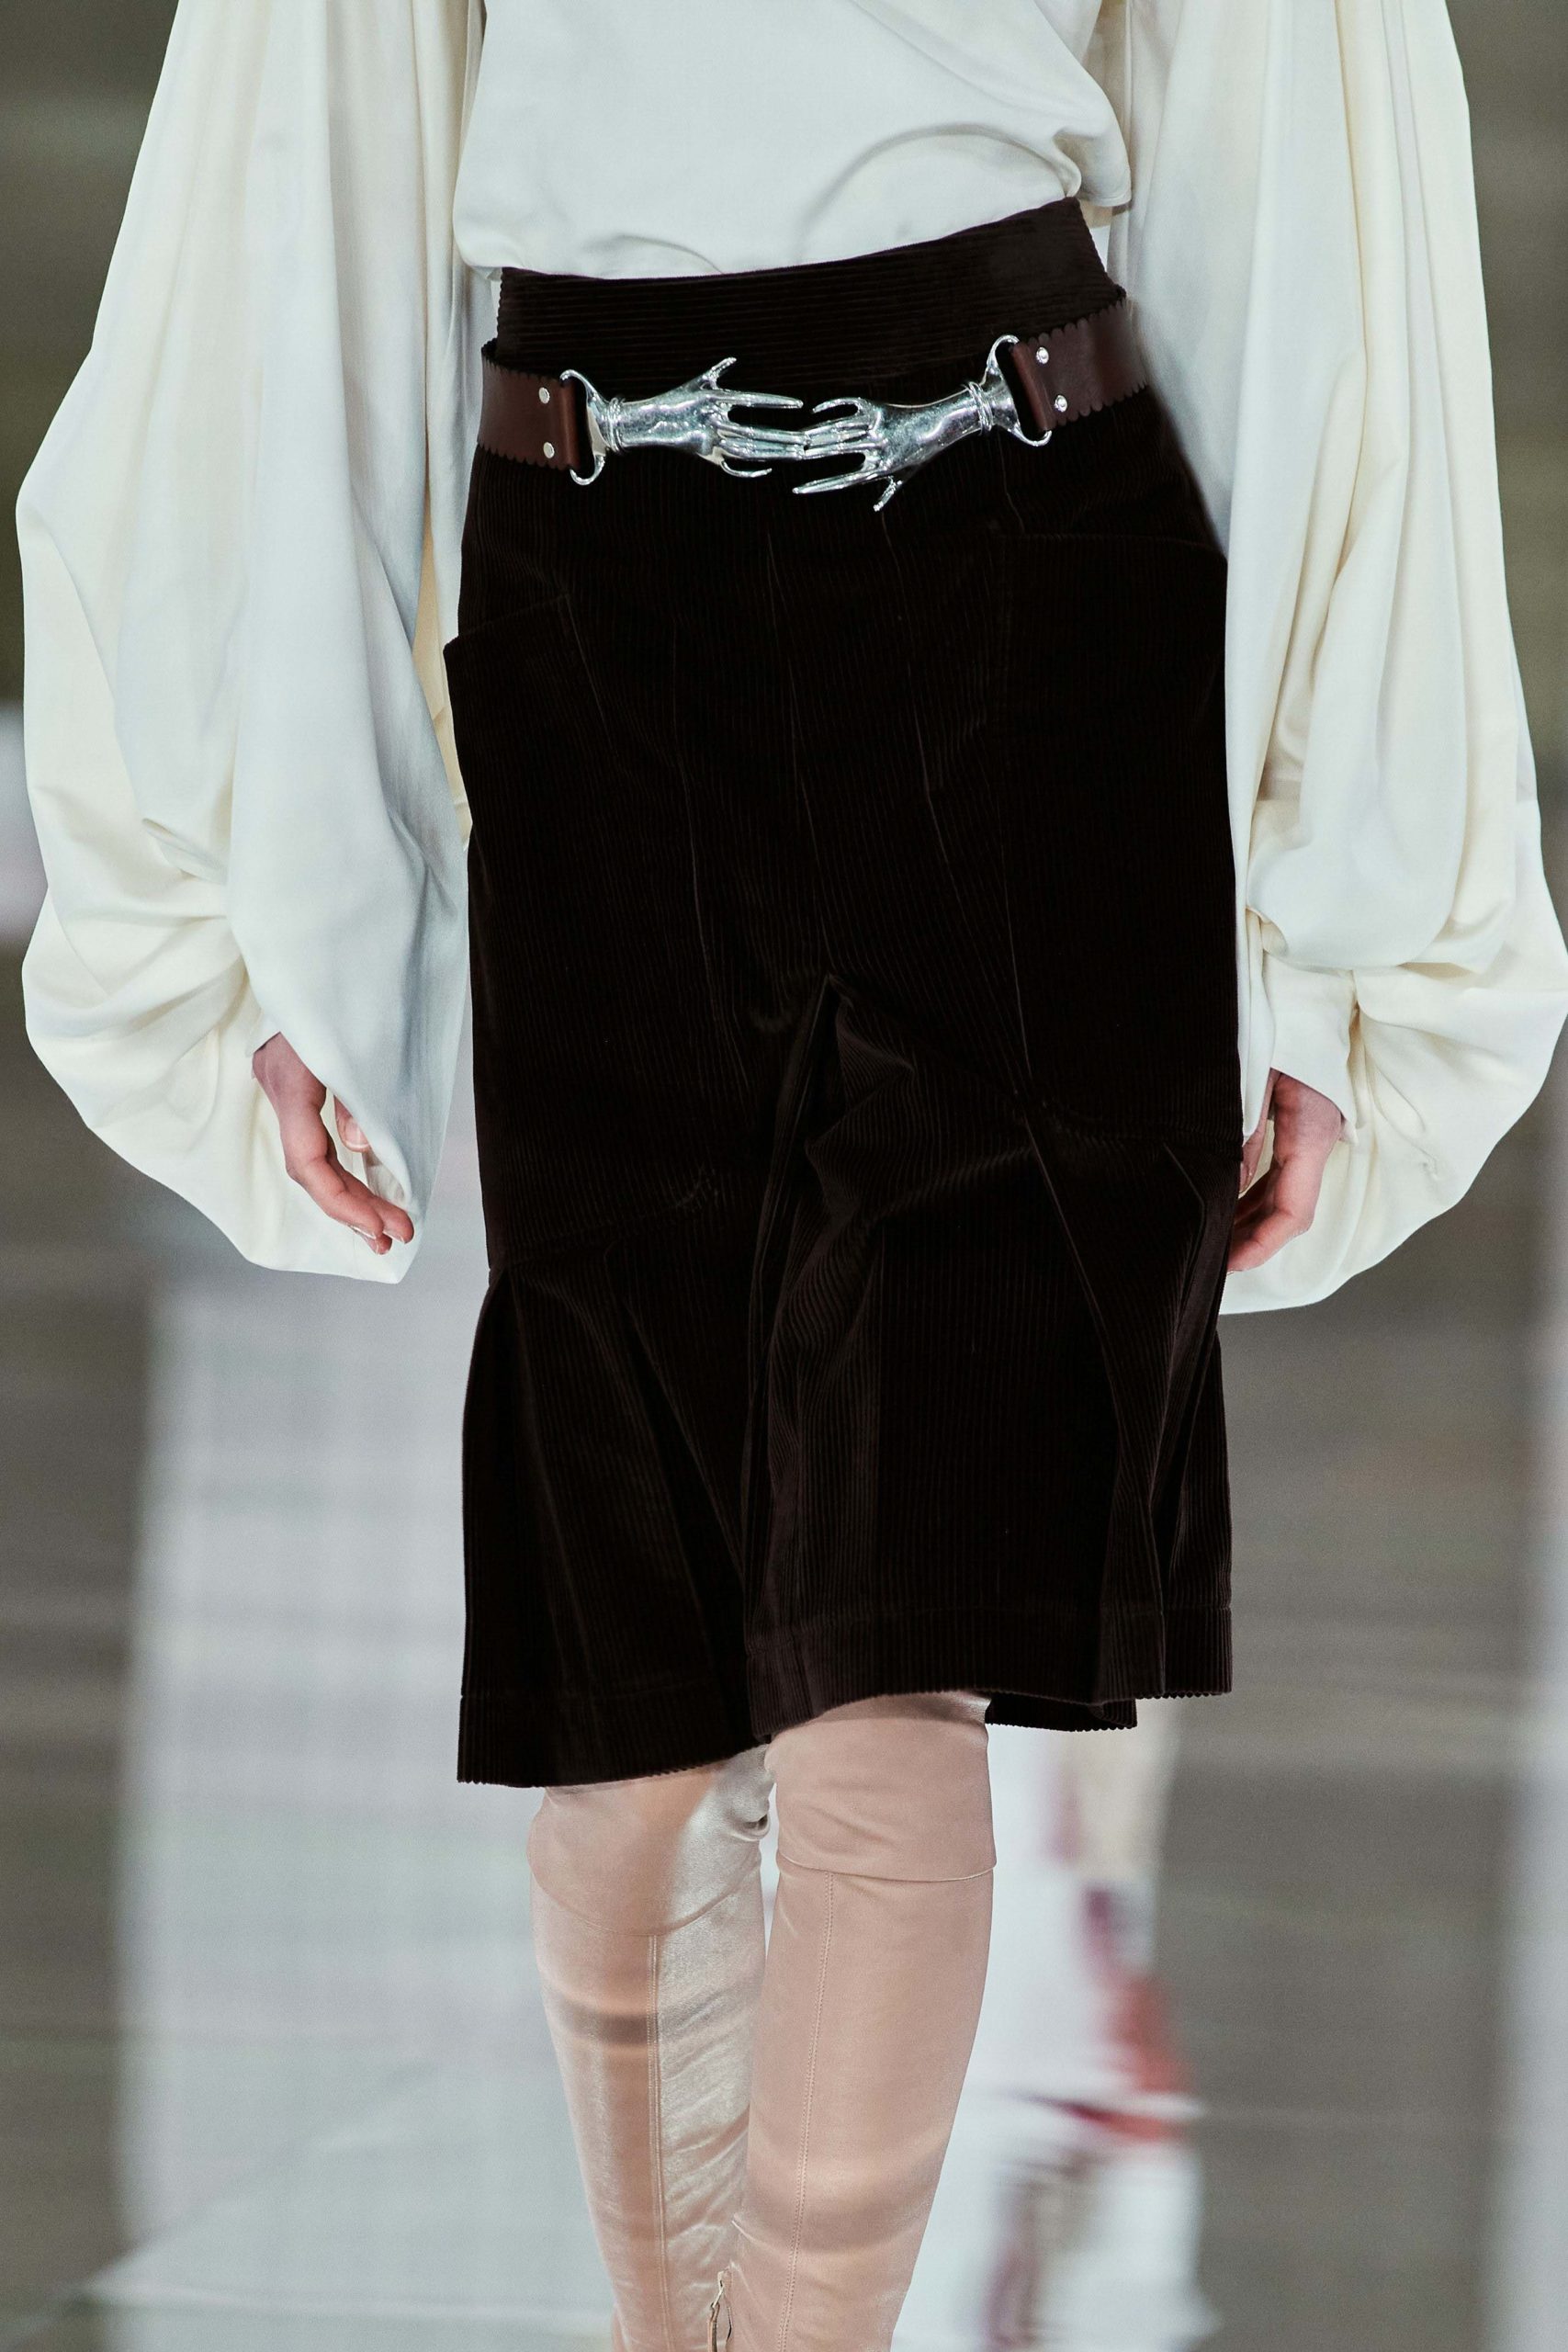 Victoria Beckham Fall 2020 trends runway coverage Ready To Wear Vogue belt